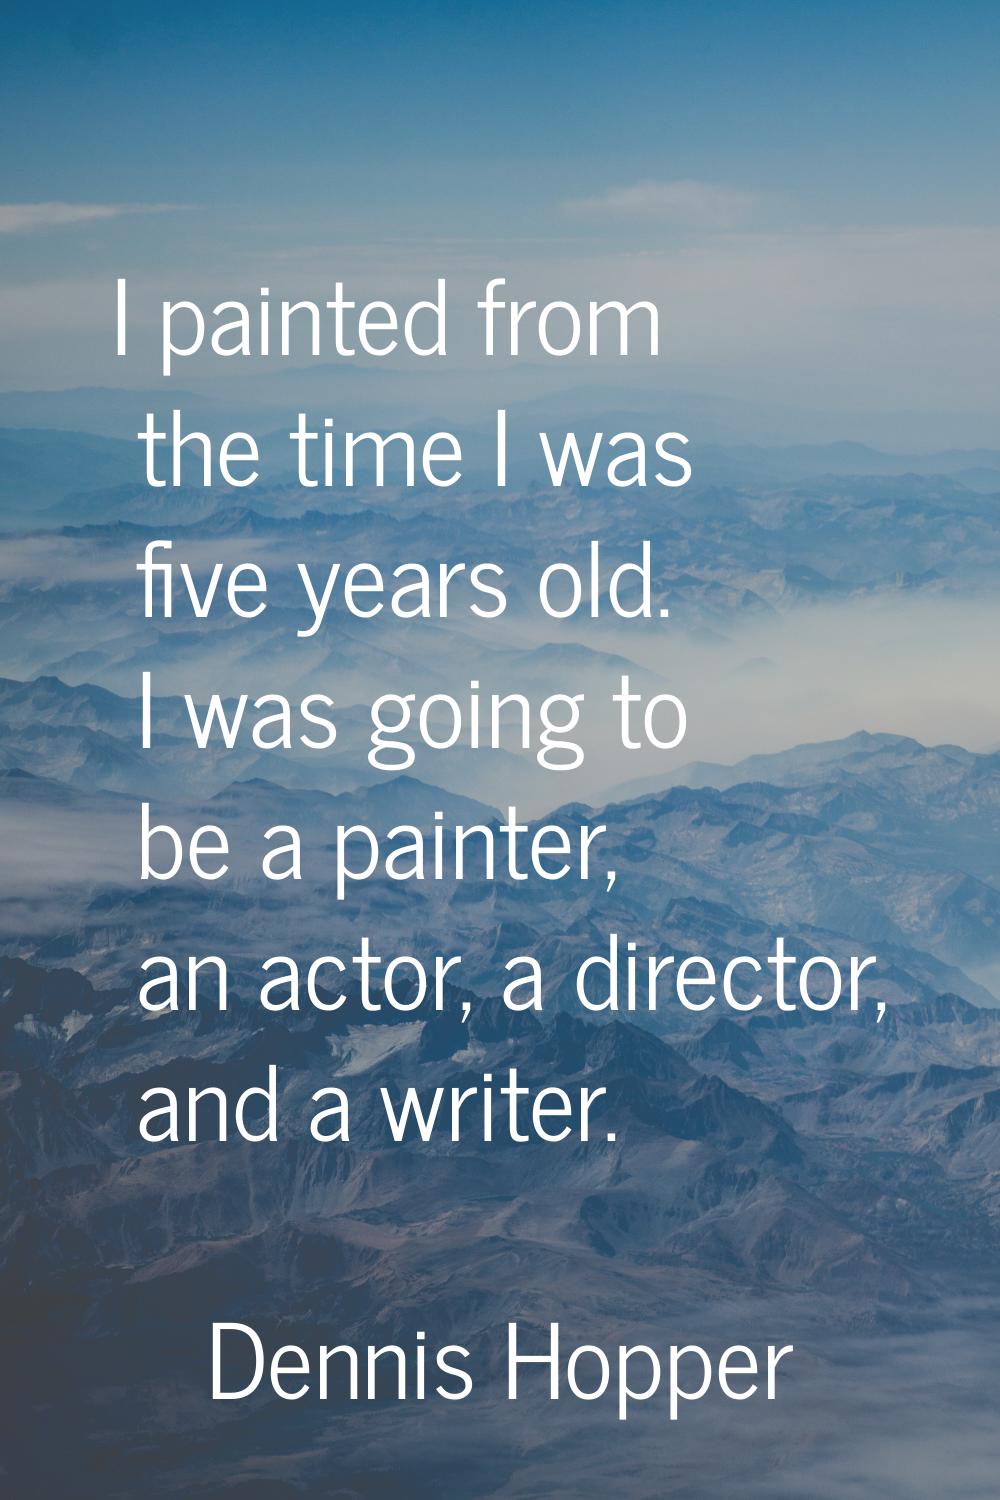 I painted from the time I was five years old. I was going to be a painter, an actor, a director, an